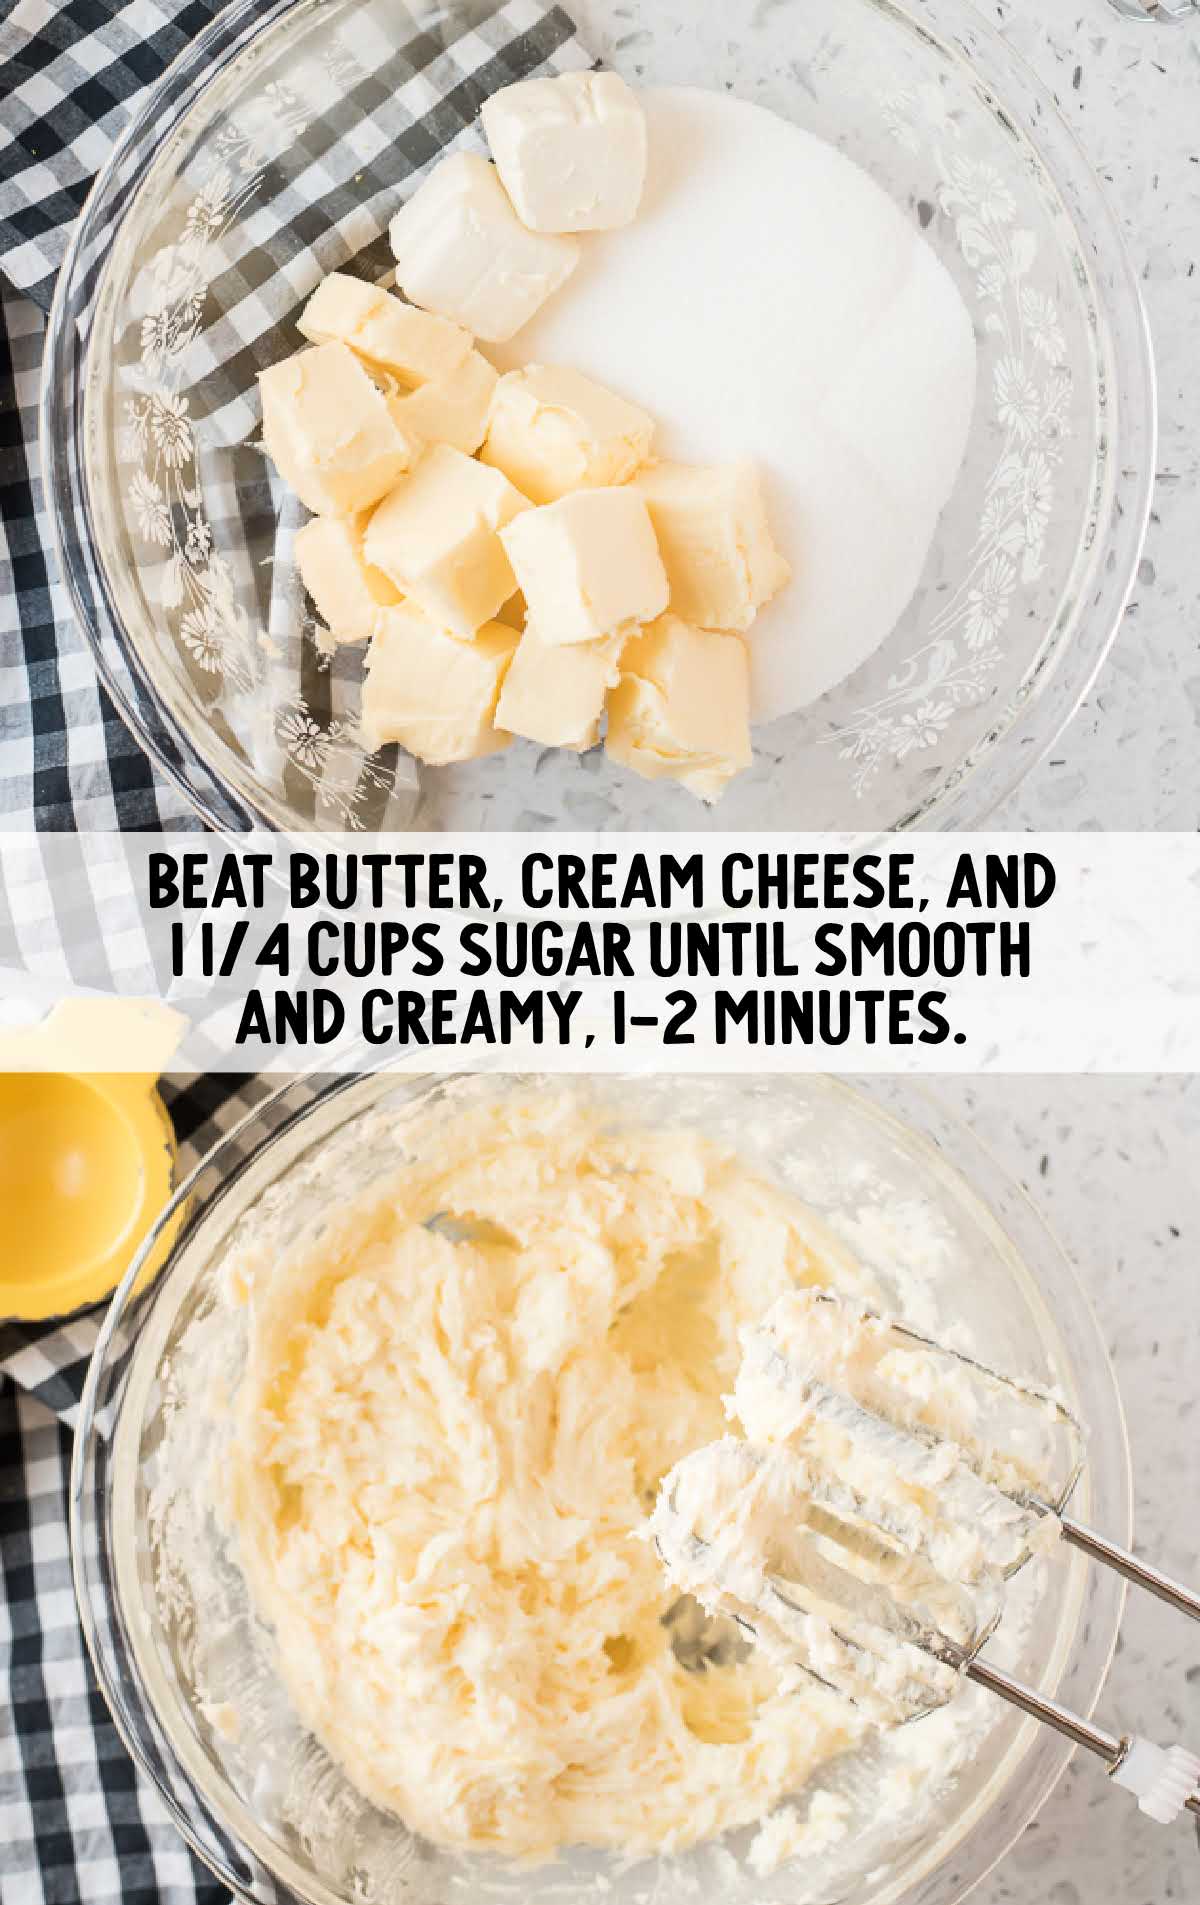 butter, cream cheese, and sugar blended together in a bowl